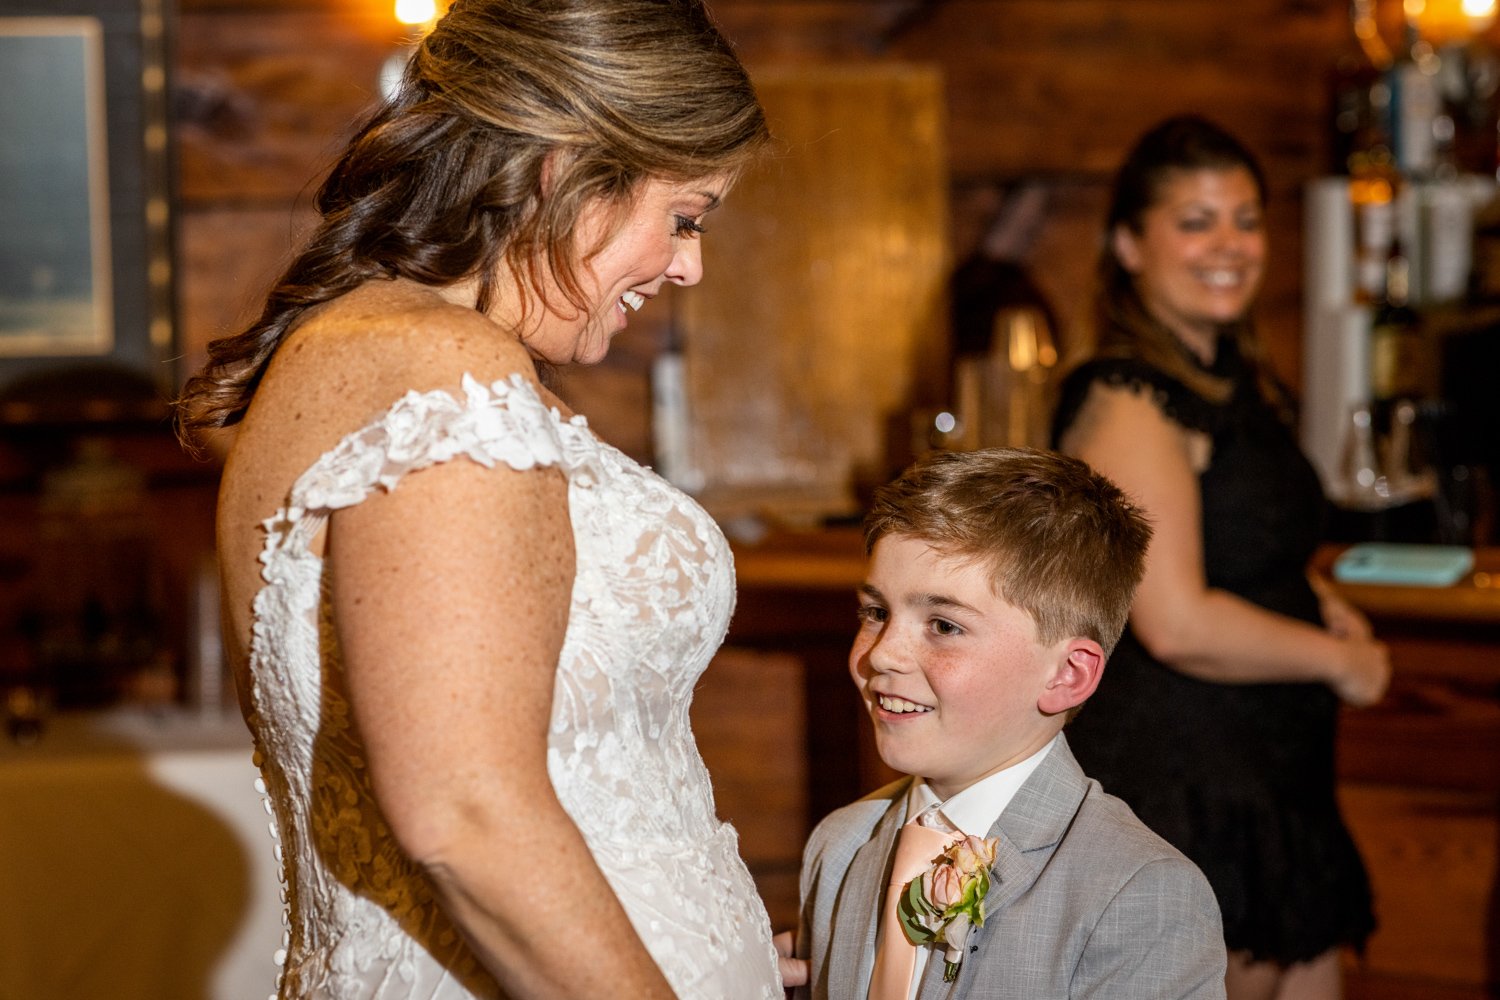 A word of warning:  If you invite #cutekids to your wedding, they're going to do #cutekidthings and then you're going to get lots of #cutekidpics.  #youvebeenwarned😏 
.
.
.
.
Hair/Makeup:Julie Rose/ Stacey Chapman -
Band/DJ: B Sharp - @bsharpenterta